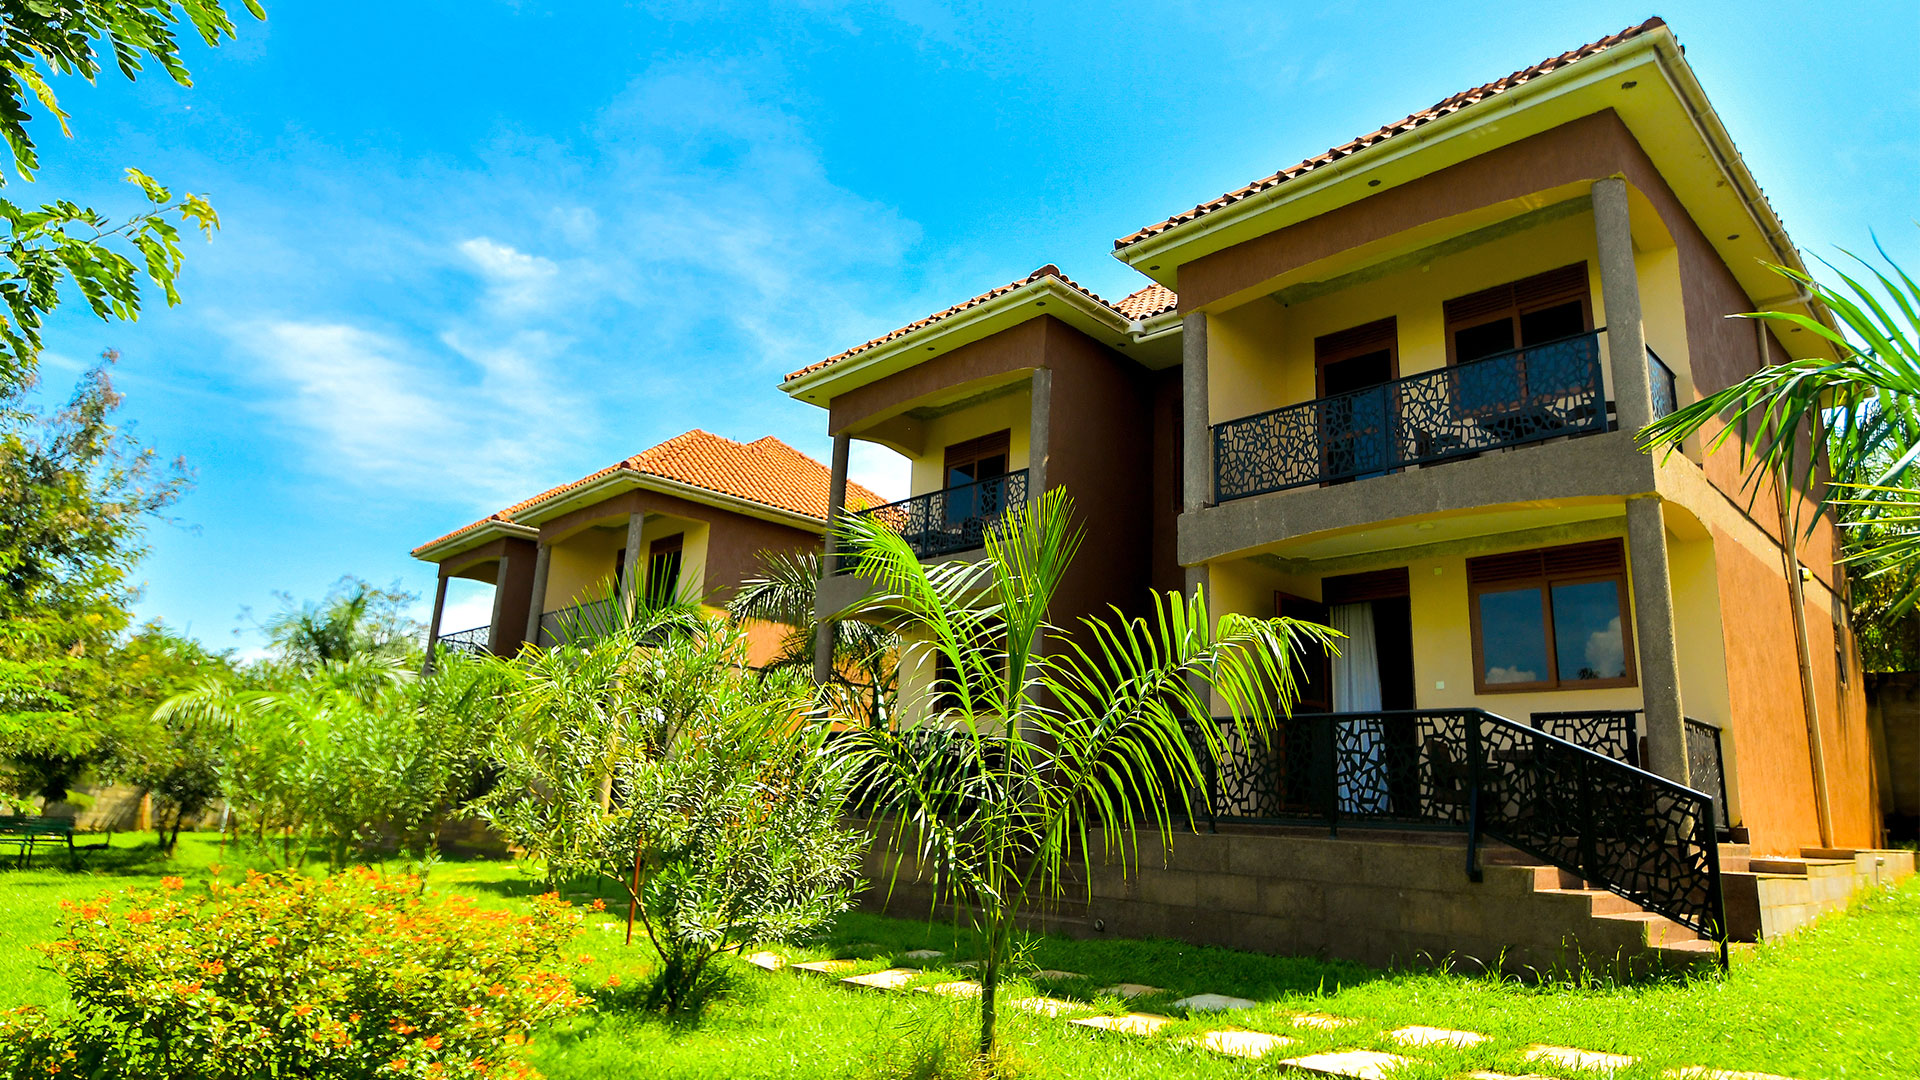 Hotels in Jinja, On Lake Victoria Shores